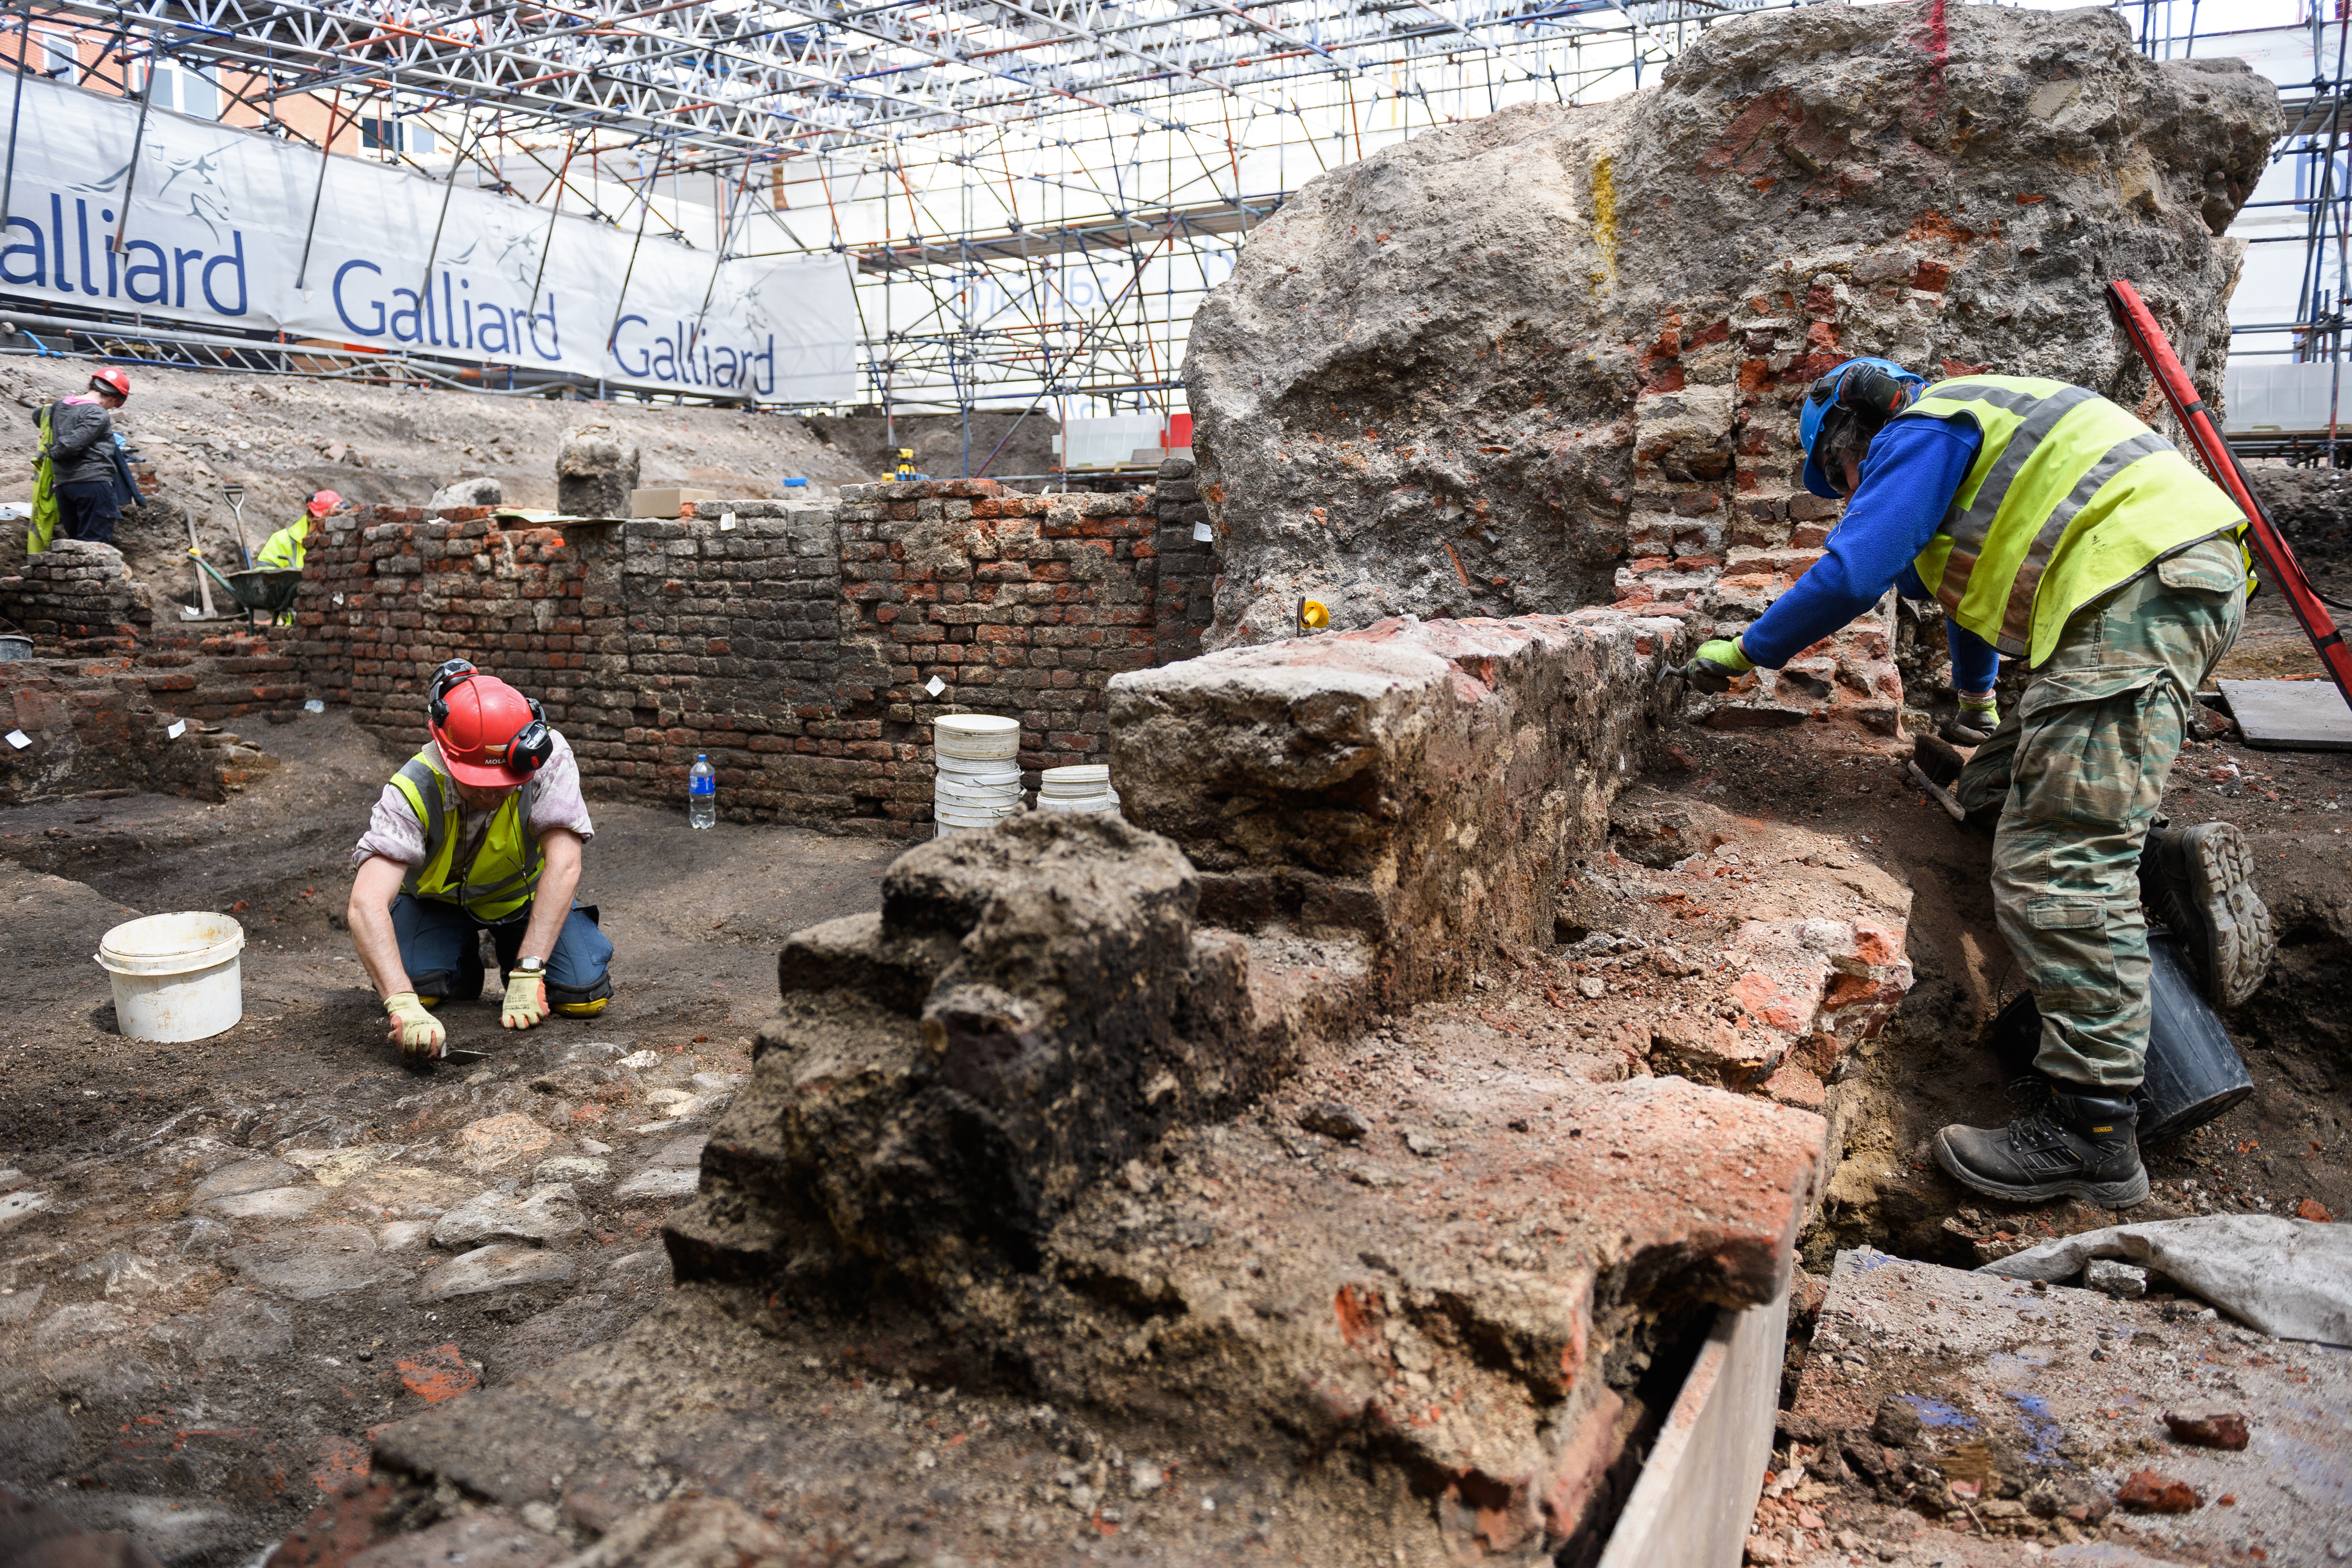 An archeological team works on the site of the Curtain Theatre in east London on May 19, 2016. /AFP